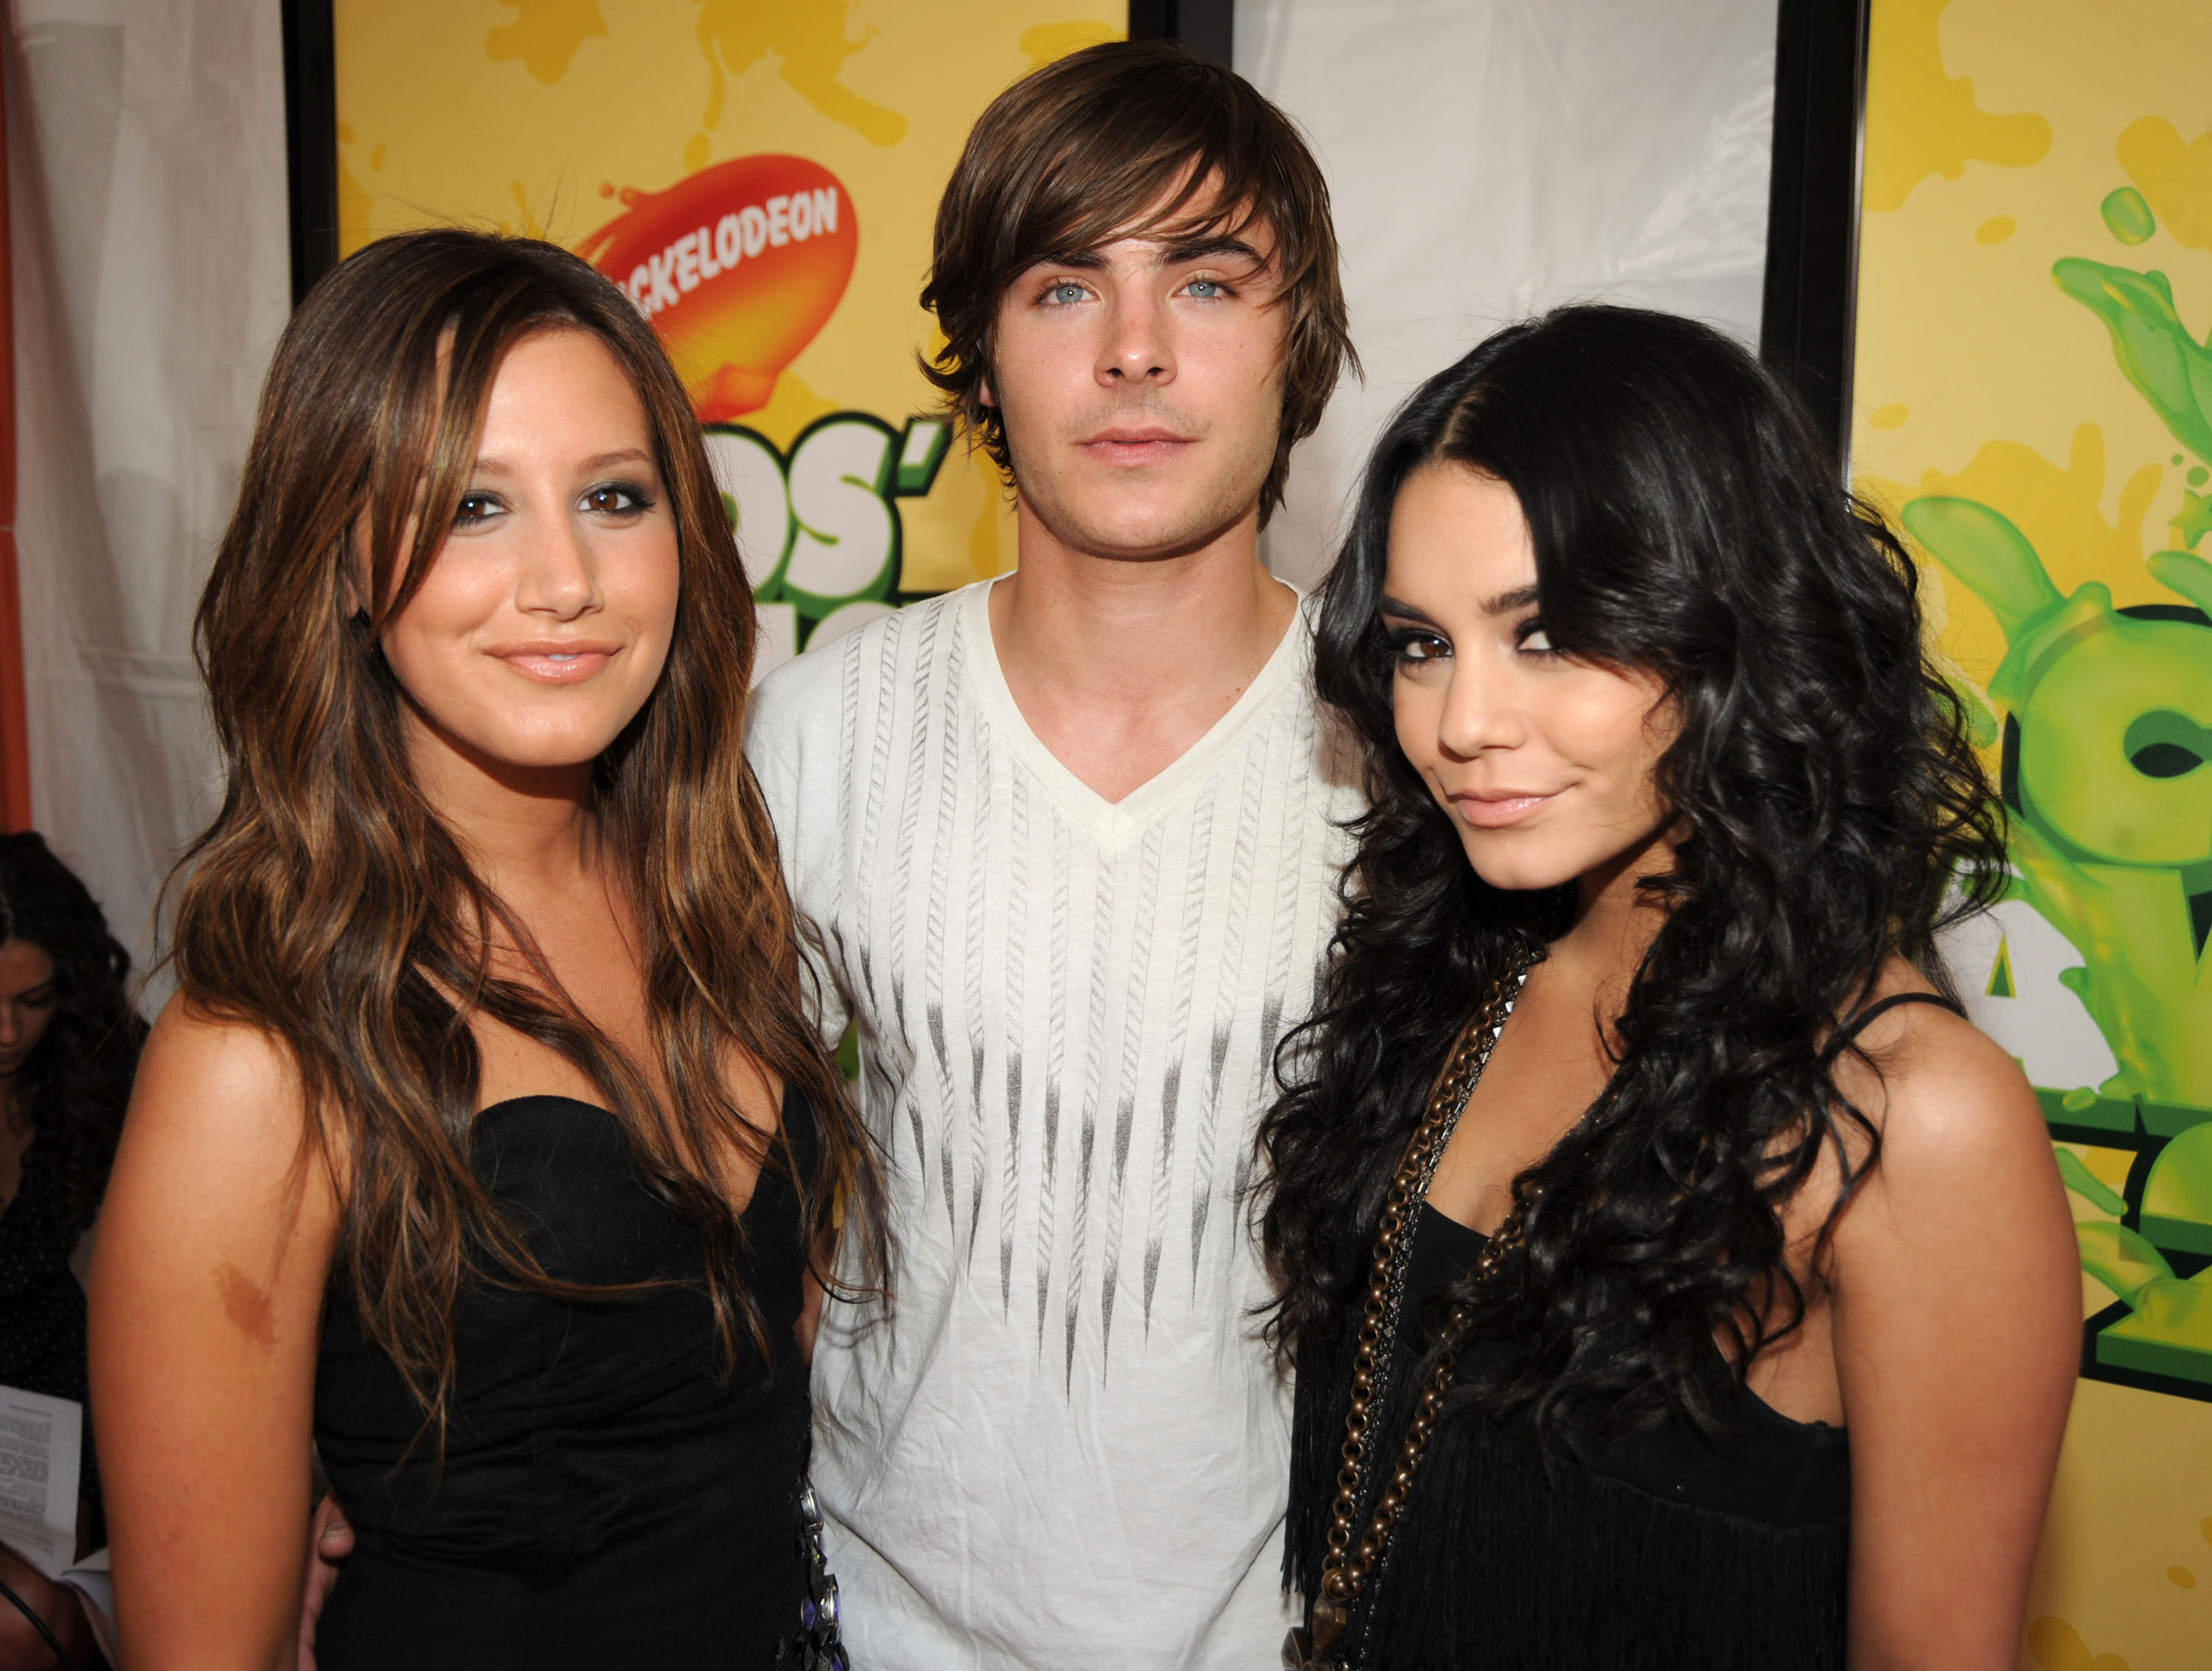 Ashley Tisdale, Zac Efron, and Vanessa Hudgens pose together at a Nickelodeon event. Tisdale wears a strapless dress, Efron in a patterned shirt, Hudgens in a chain strap dress